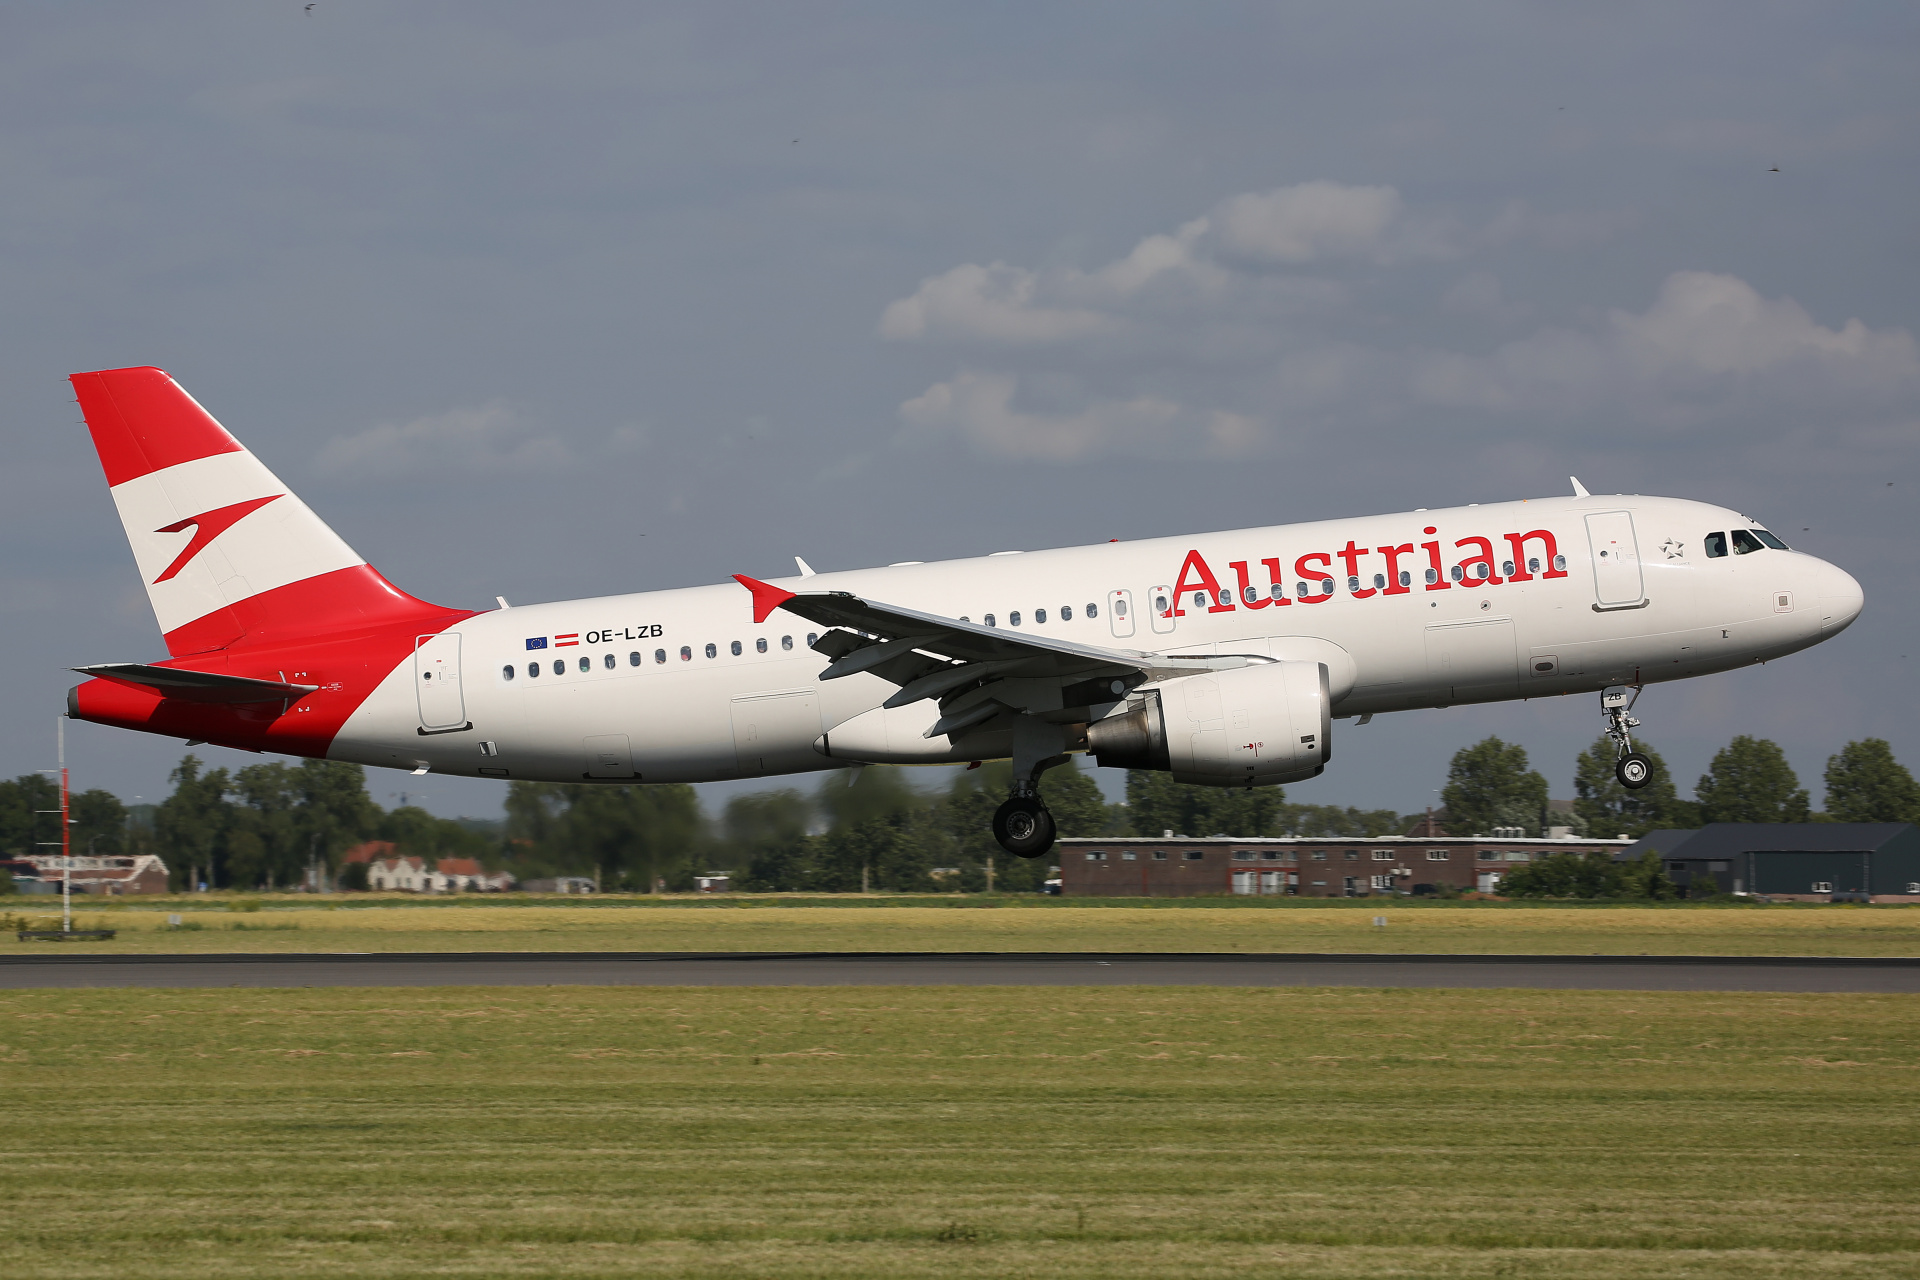 OE-LZB, Austrian Airlines (Aircraft » Schiphol Spotting » Airbus A320-200)